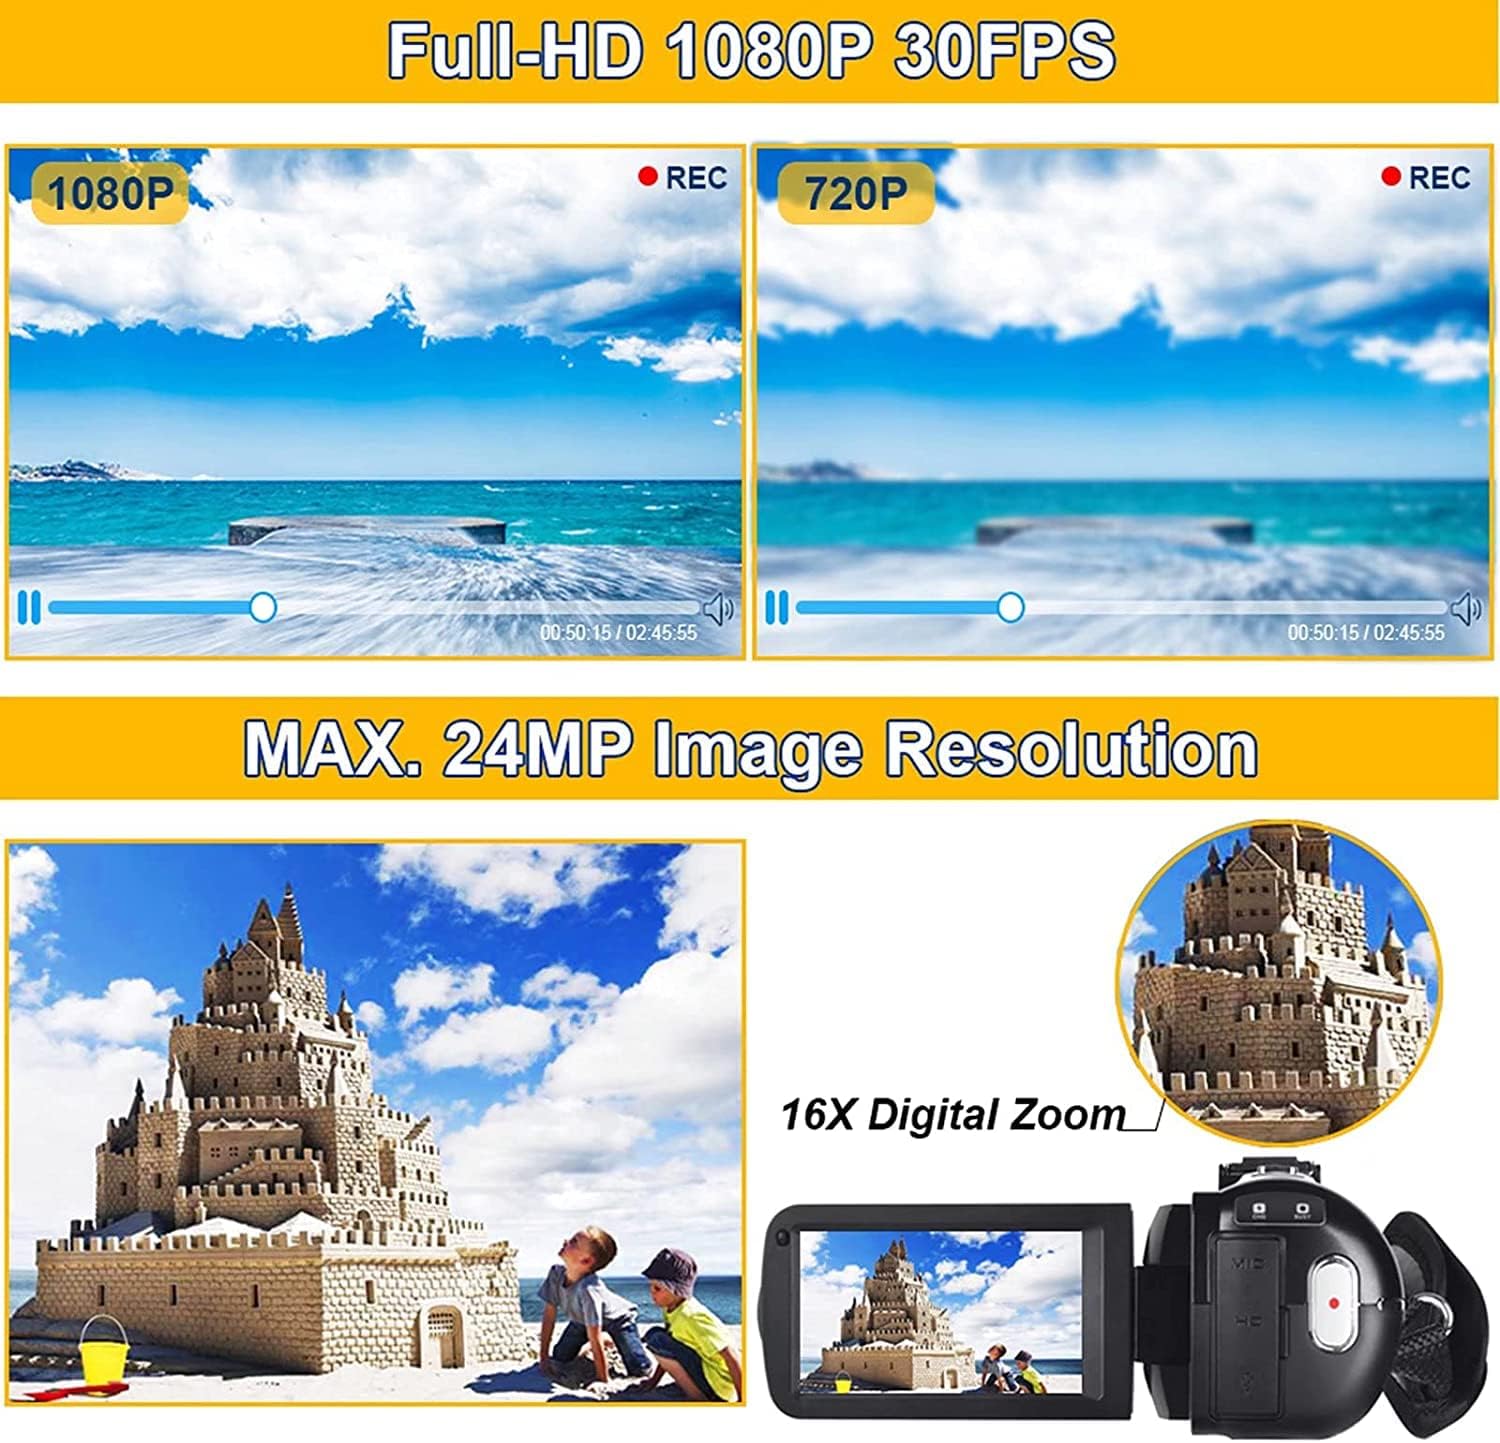 Check of Video Camera Camcorder Full HD 1080P 30FPS 24.0 MP IR Night Vision Vlogging Camera Recorder 3.0 Inch IPS Screen 16X Zoom Camcorders Camera Remote Control with 2 Batteries